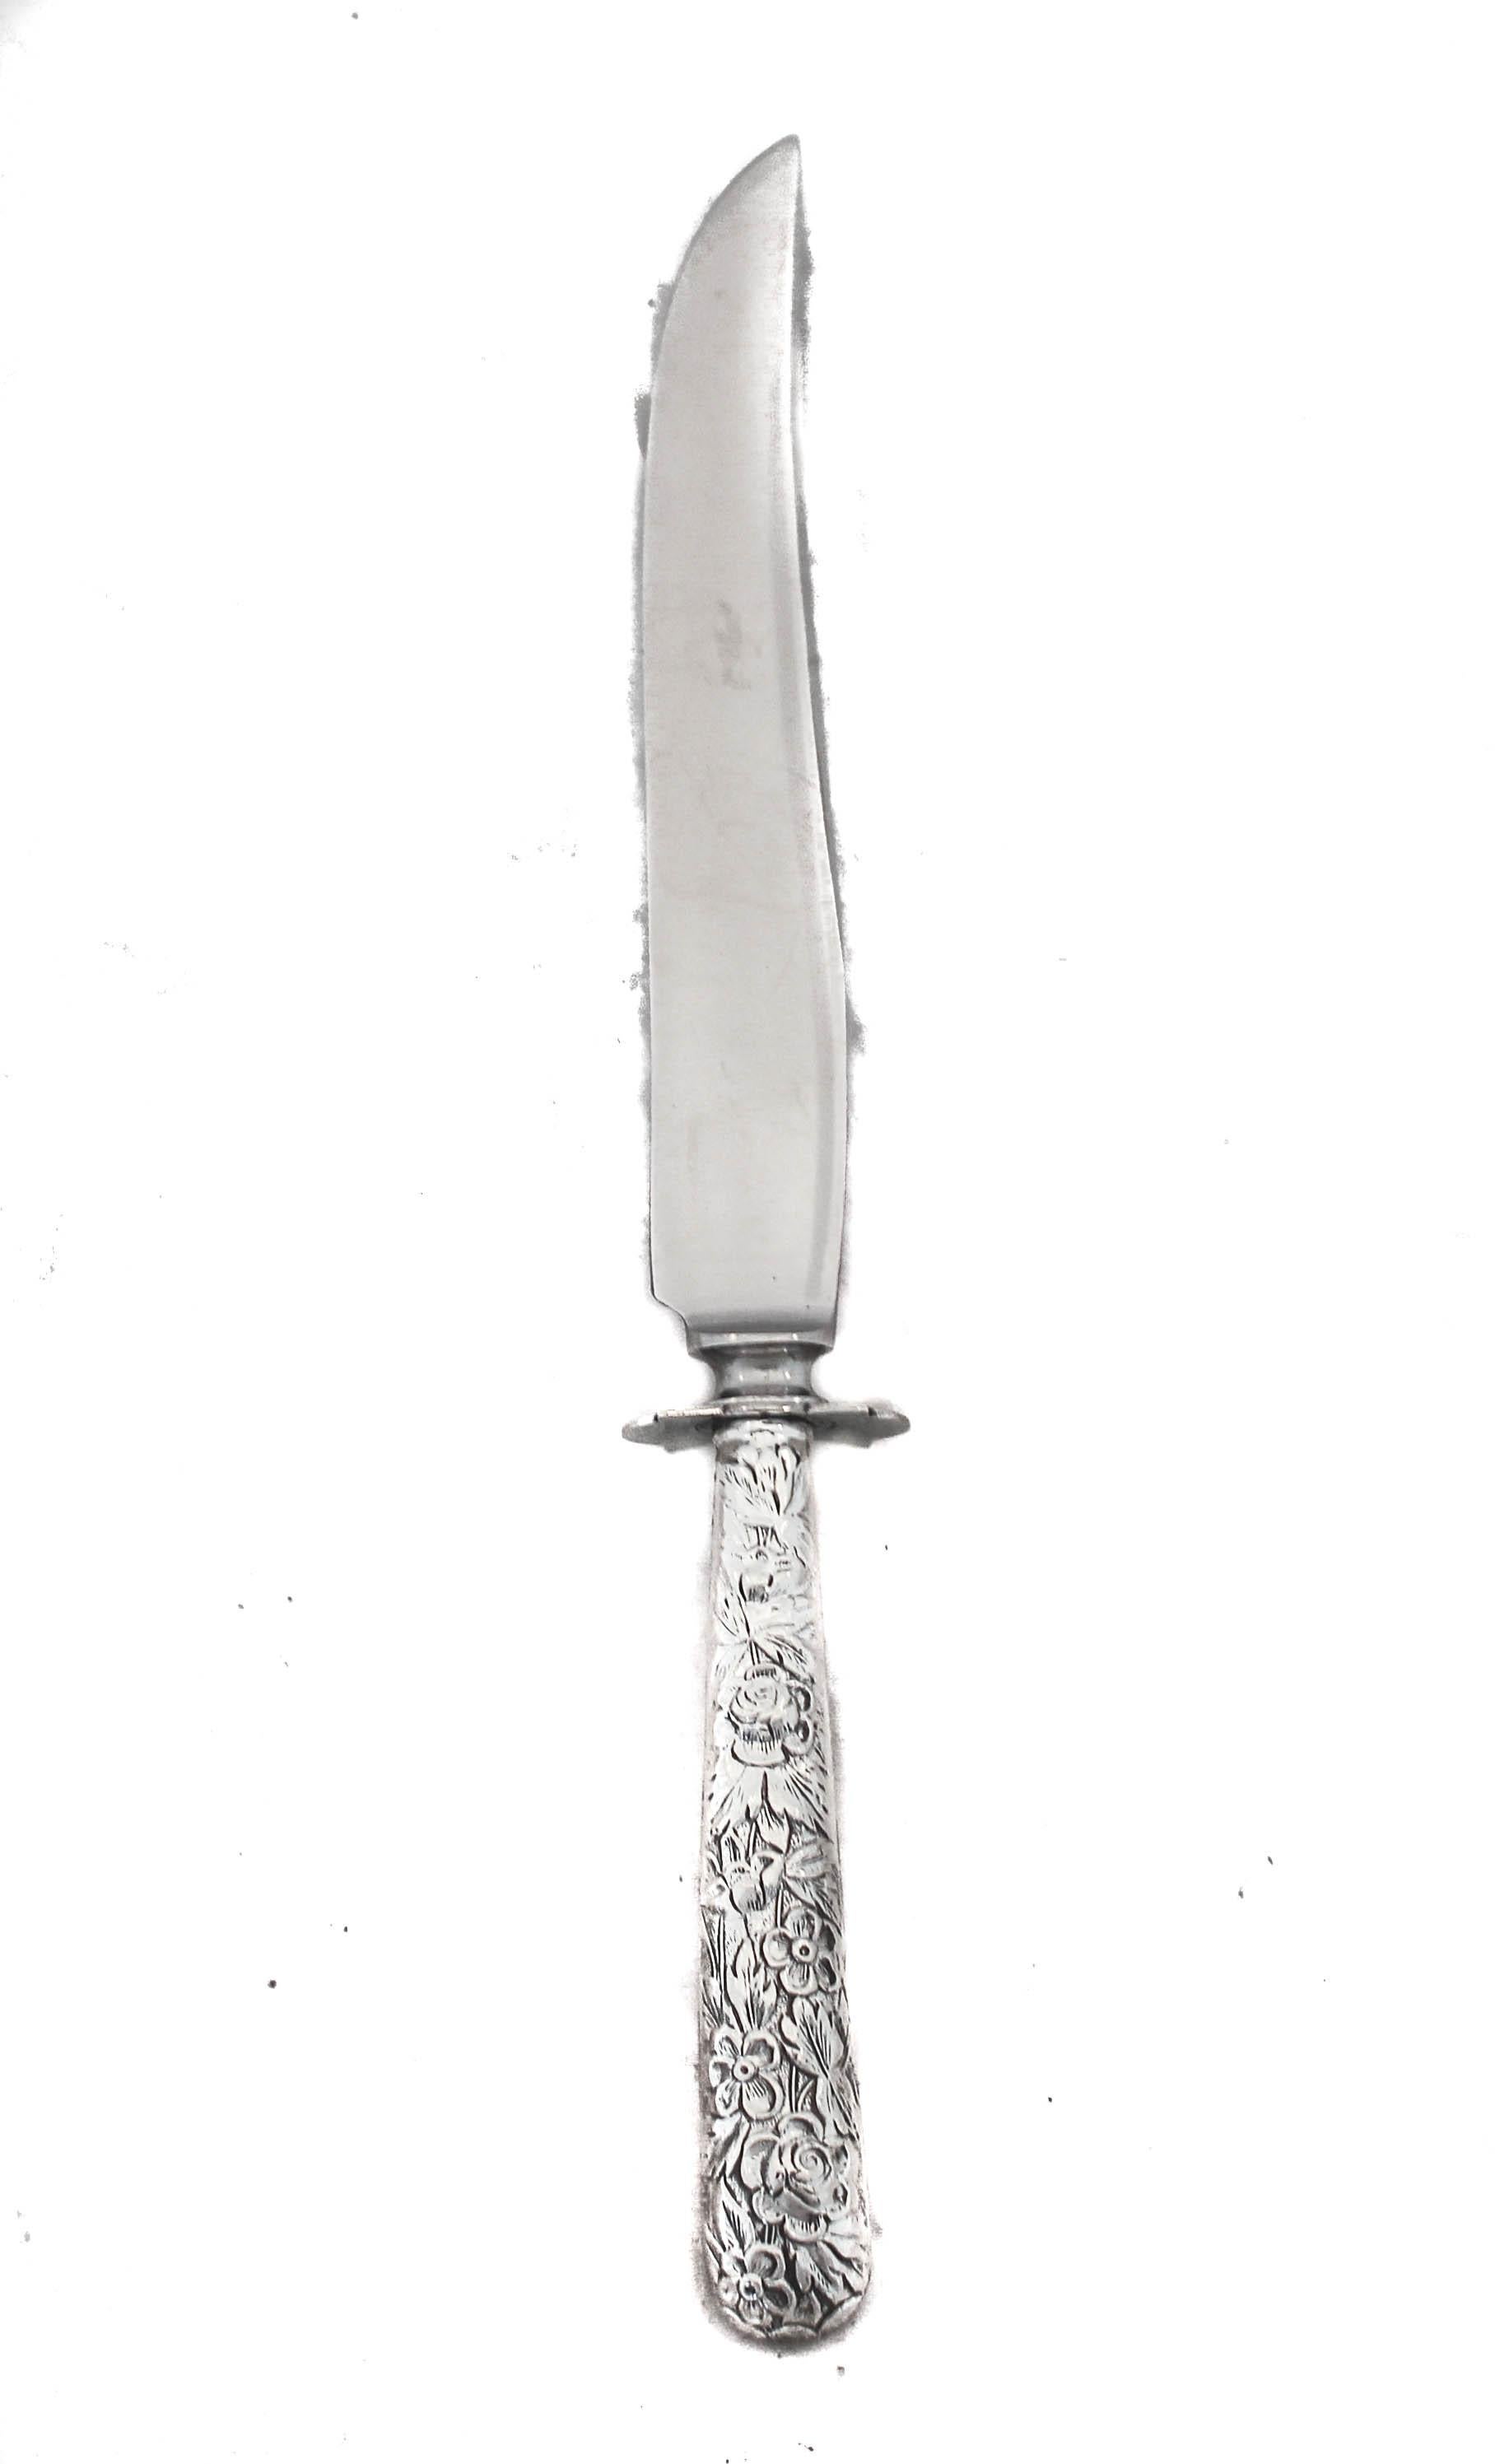 We are happy to offer you this sterling silver carving fork and knife in the Rose pattern by Kirk-Stieff Silver Company. Blown-out flowers and leaves decorate the handles in the classic Rose pattern that became so popular and synonymous with the